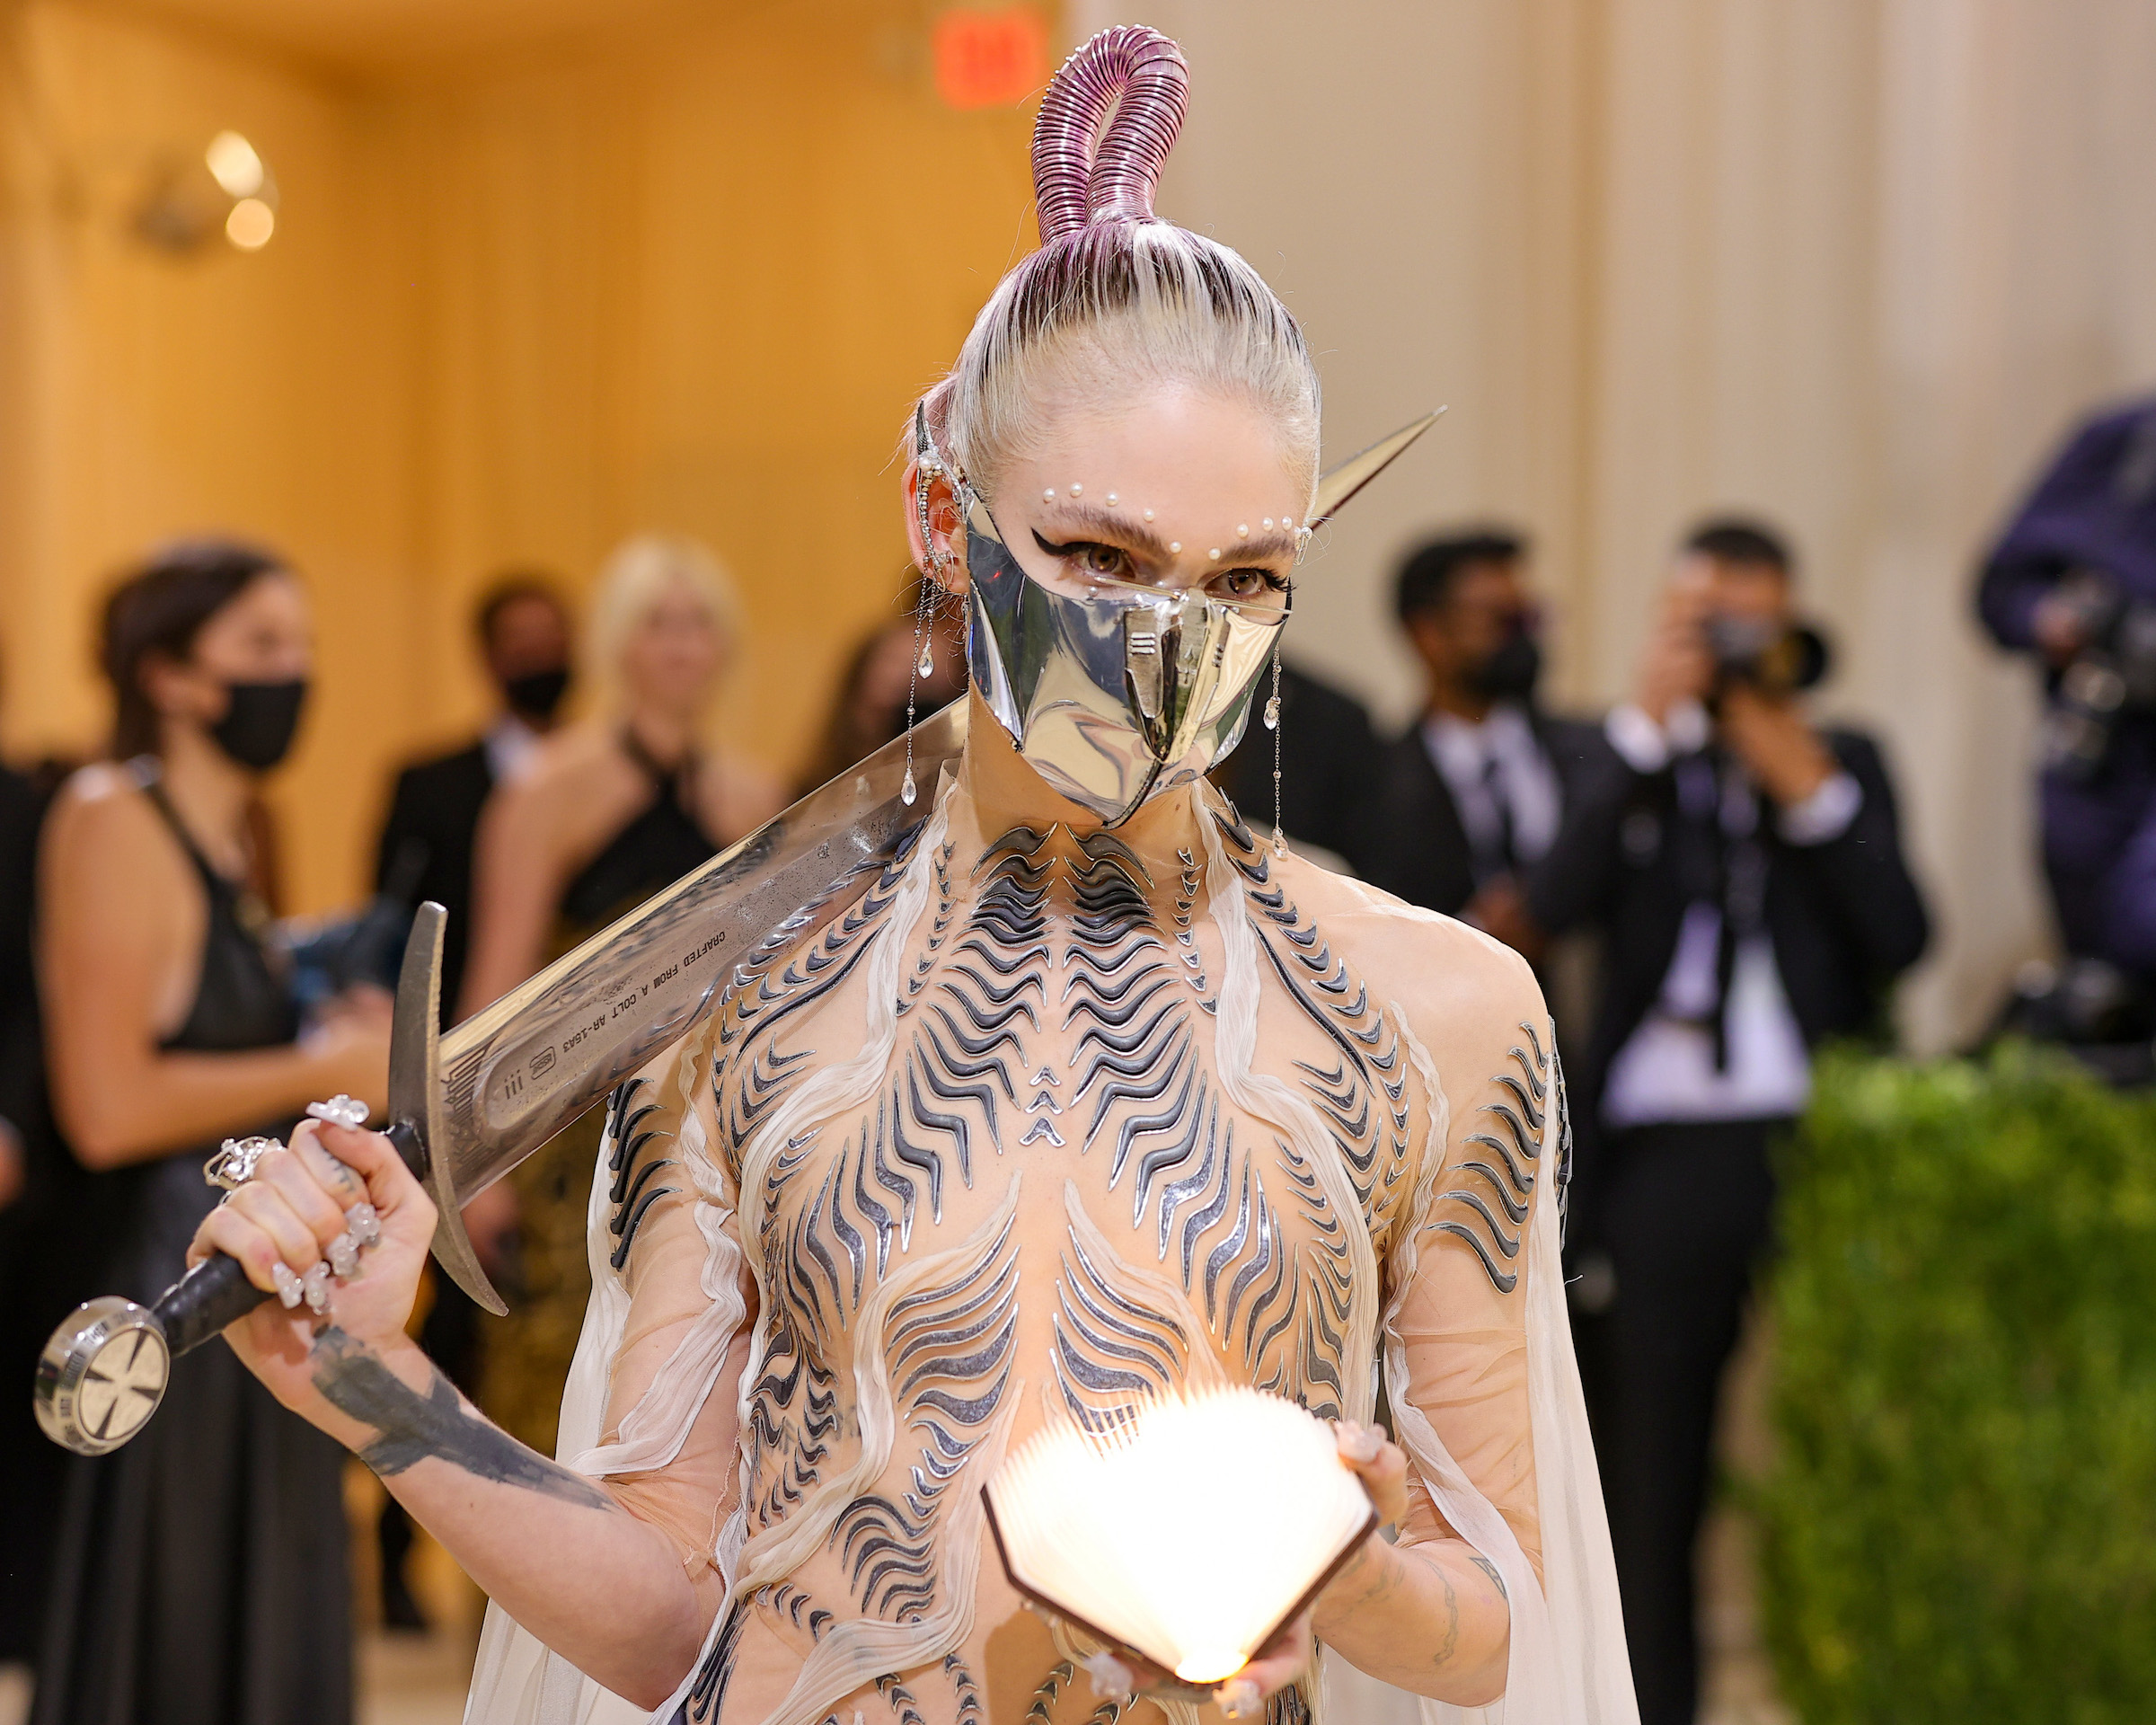 Grimes attends The 2021 Met Gala Celebrating In America: A Lexicon Of Fashion at Metropolitan Museum of Art on September 13, 2021 in New York City.